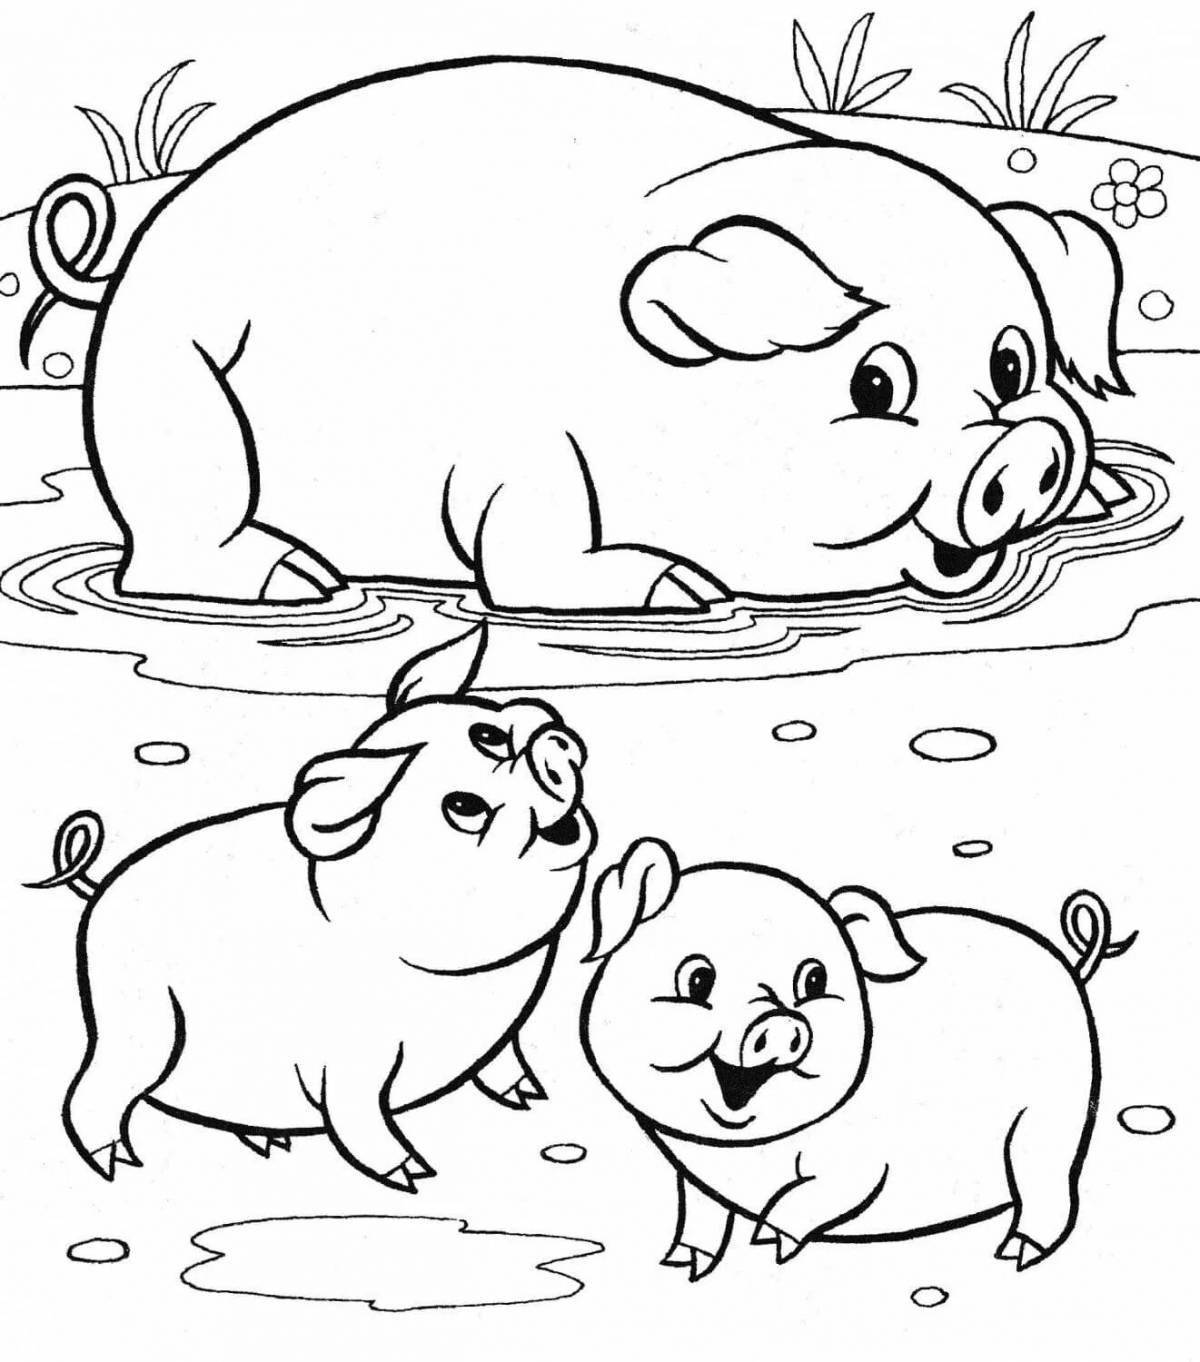 Great pet coloring pages for kids